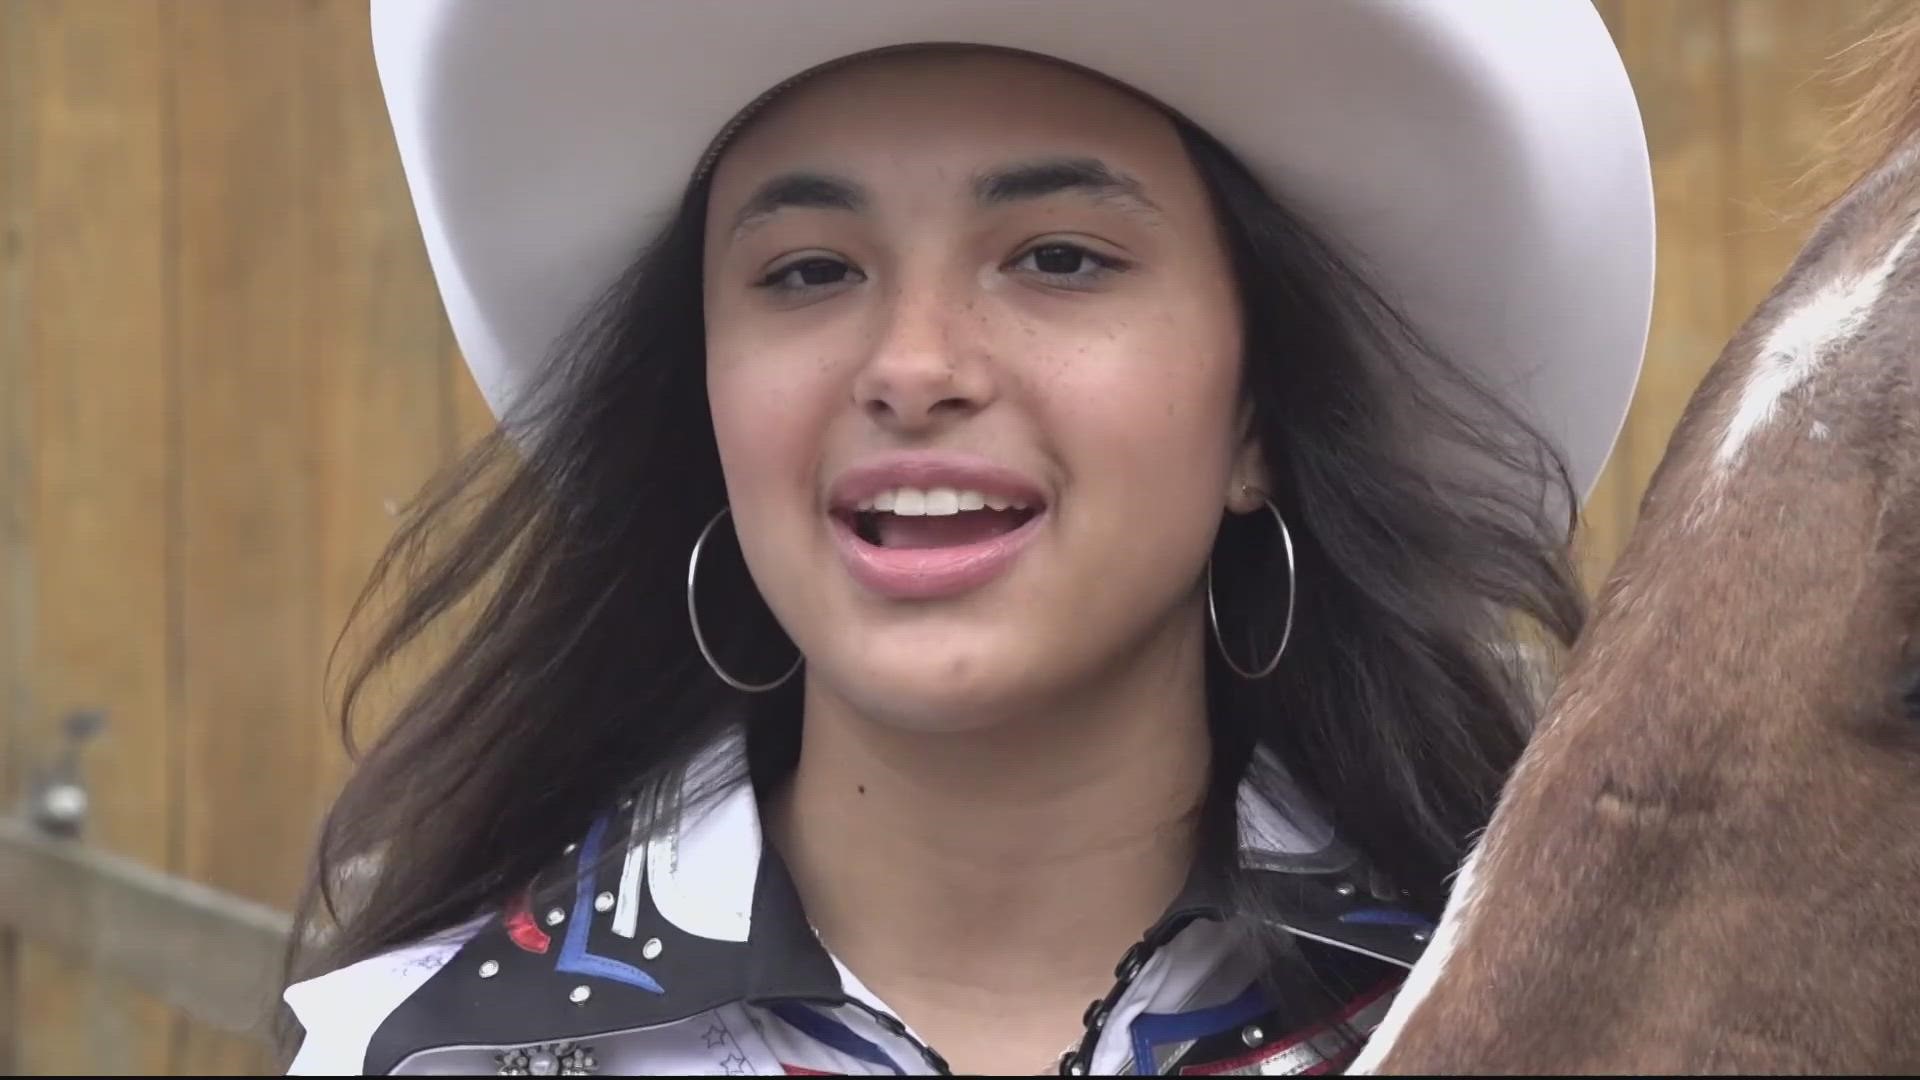 You're likely to find most of the competitors and spectators of a rodeo are white. We talked to an incredible PG County teenager who's looking to change that.